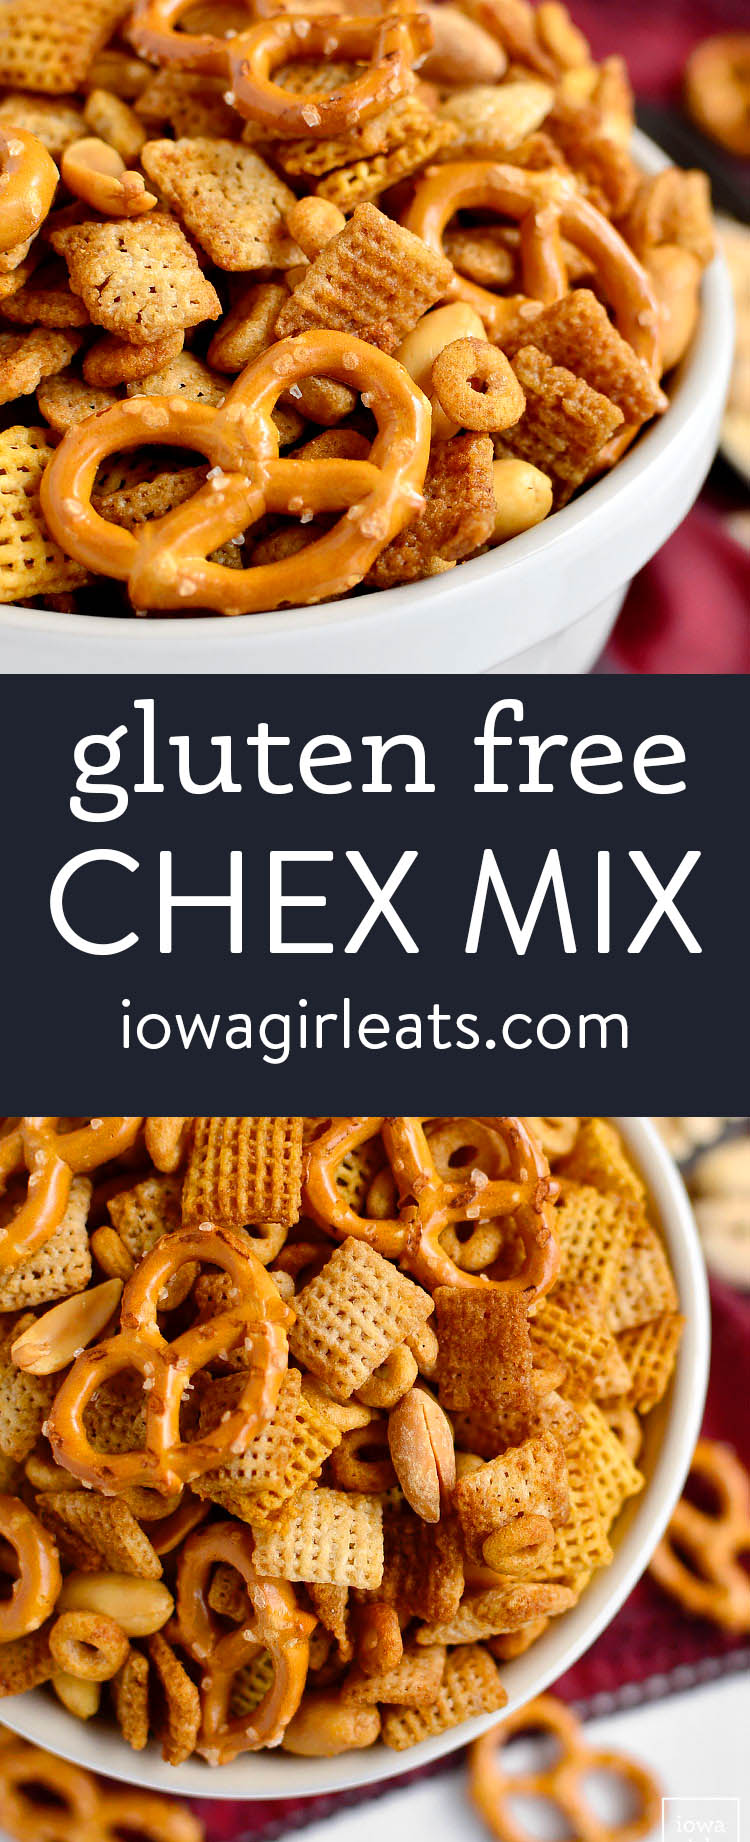 photo collage of bowl of gluten free chex mix